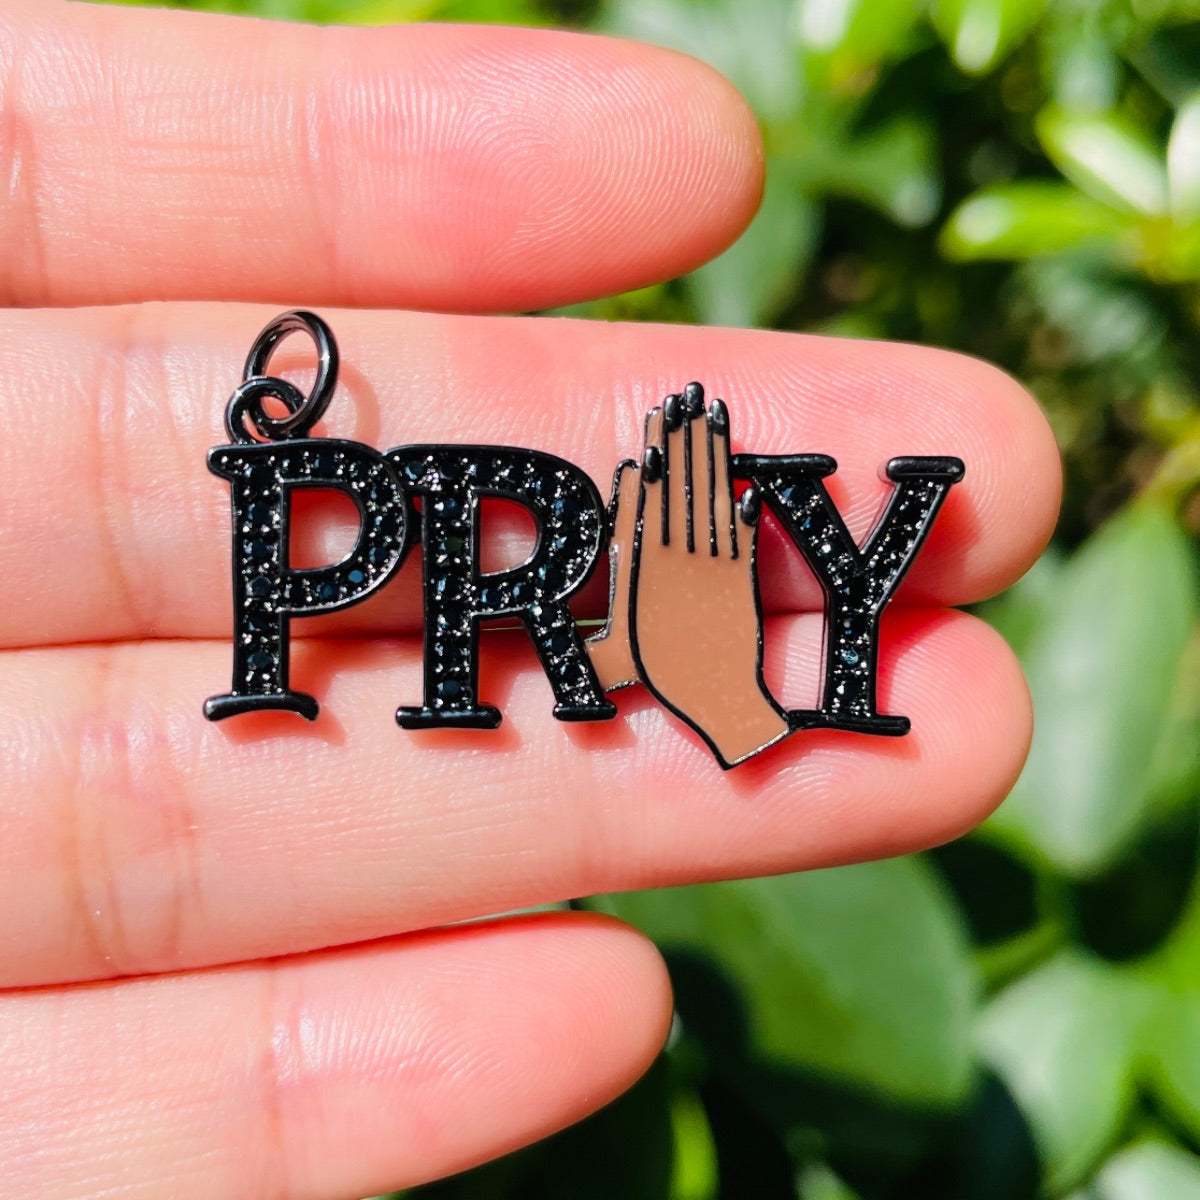 10pcs/lot 35*18mm CZ Pave Praying Hands Pray Word Charms Black on Black CZ Paved Charms Christian Quotes New Charms Arrivals Words & Quotes Charms Beads Beyond